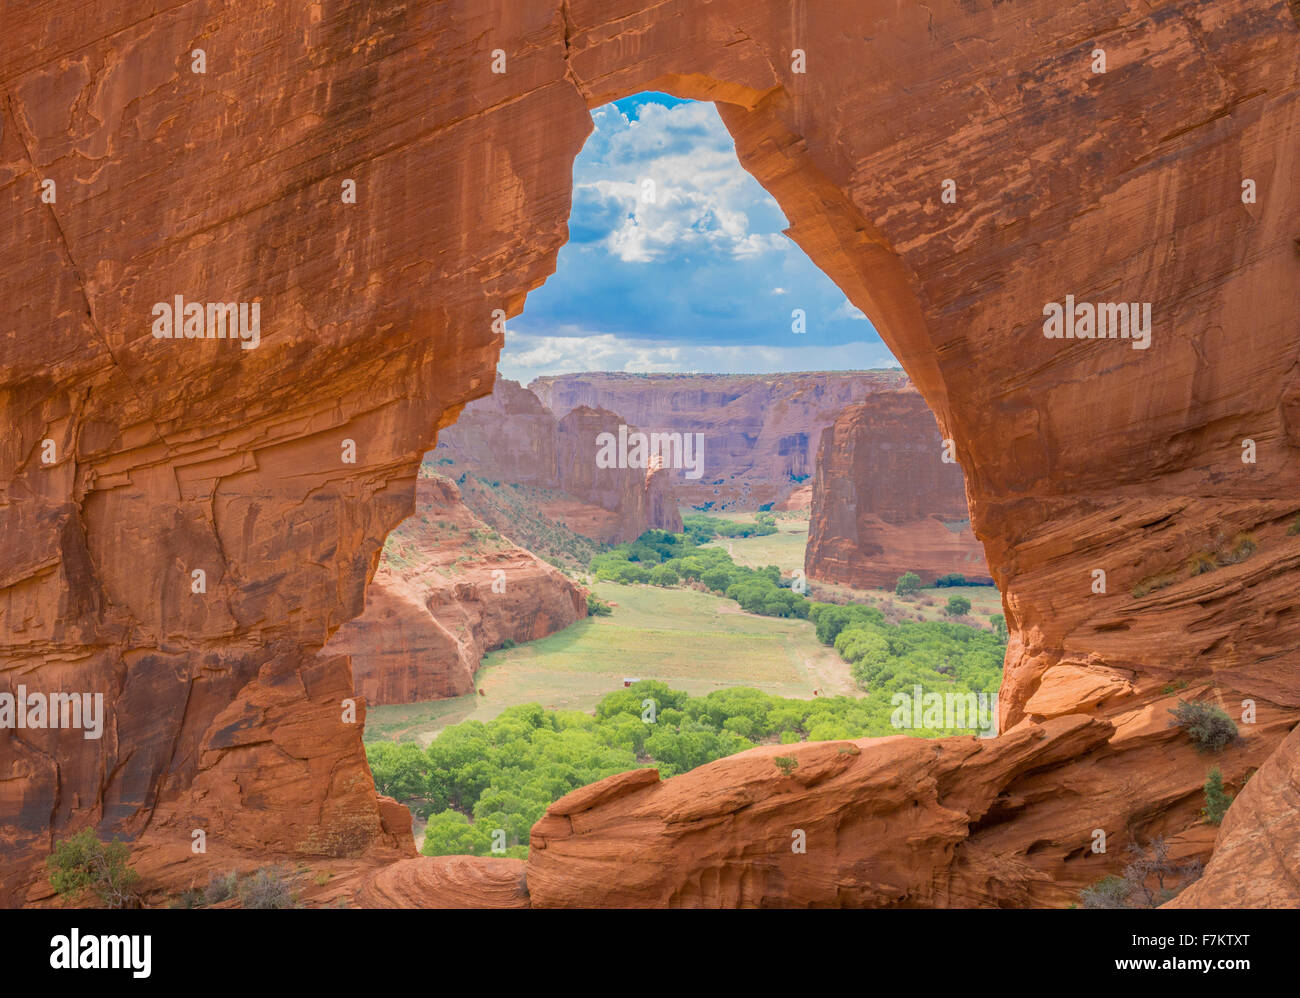 The Window,  Canyon de Chelly National Monument, Arizona, Large sandstone natural arch framing canyon Stock Photo